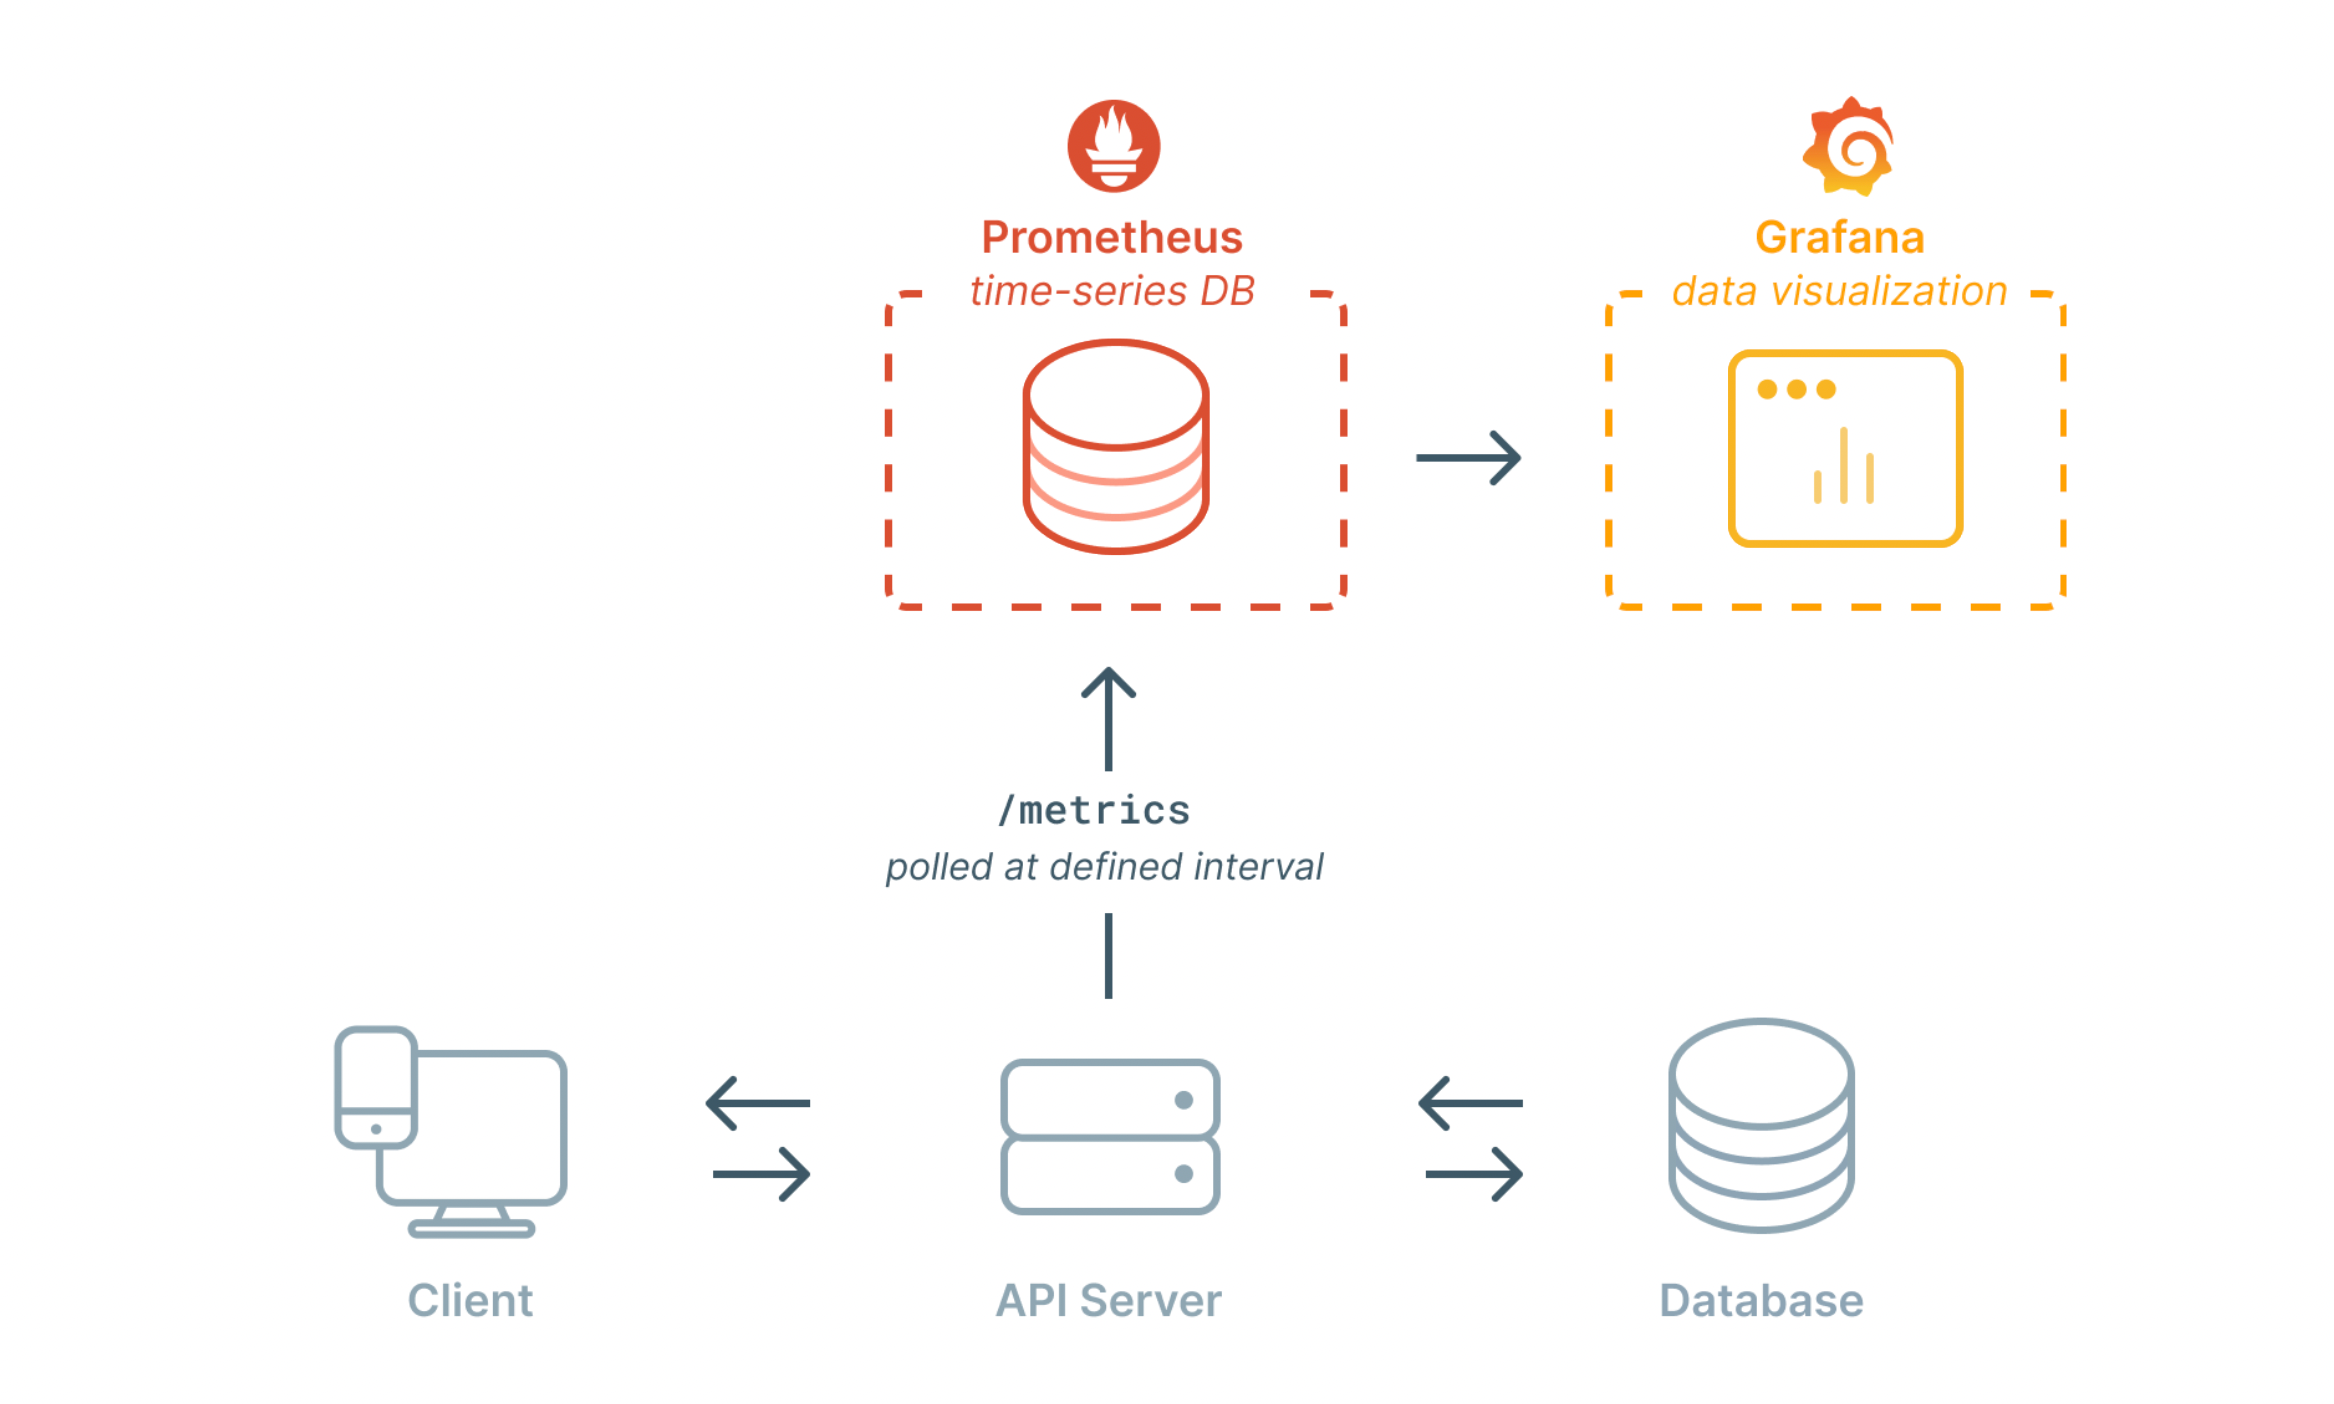 Application architecture with Prometheus and Grafana